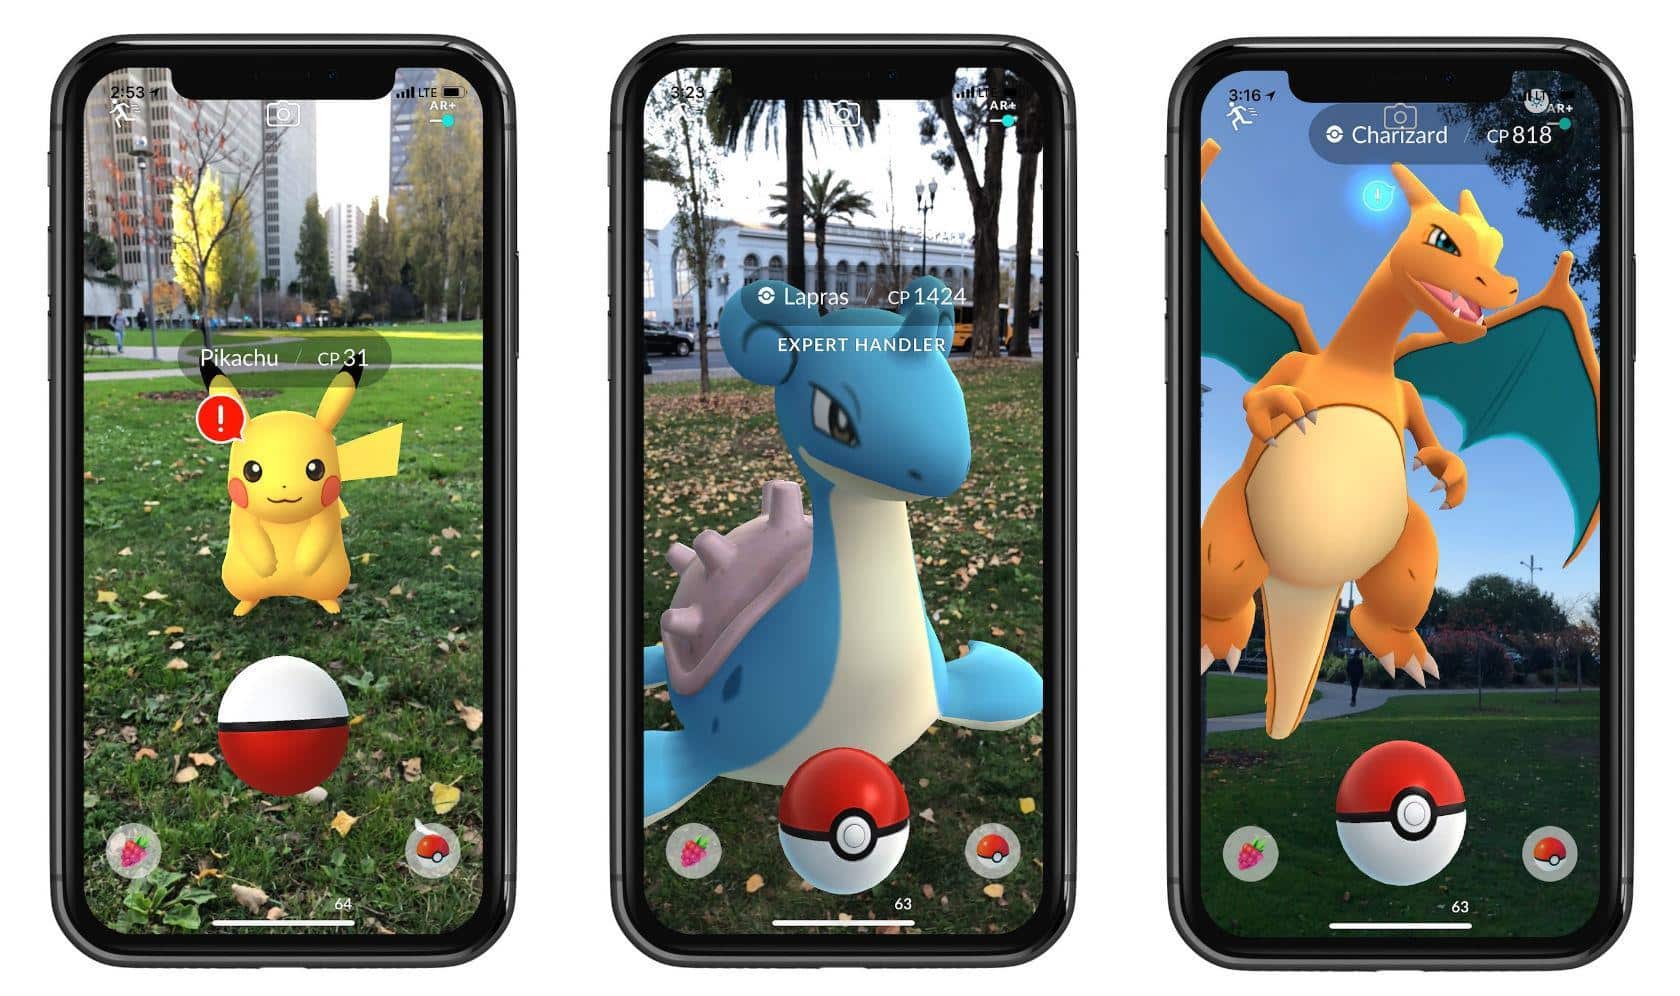 Pokemon GO AR+ update gives iPhone Trainers an edge